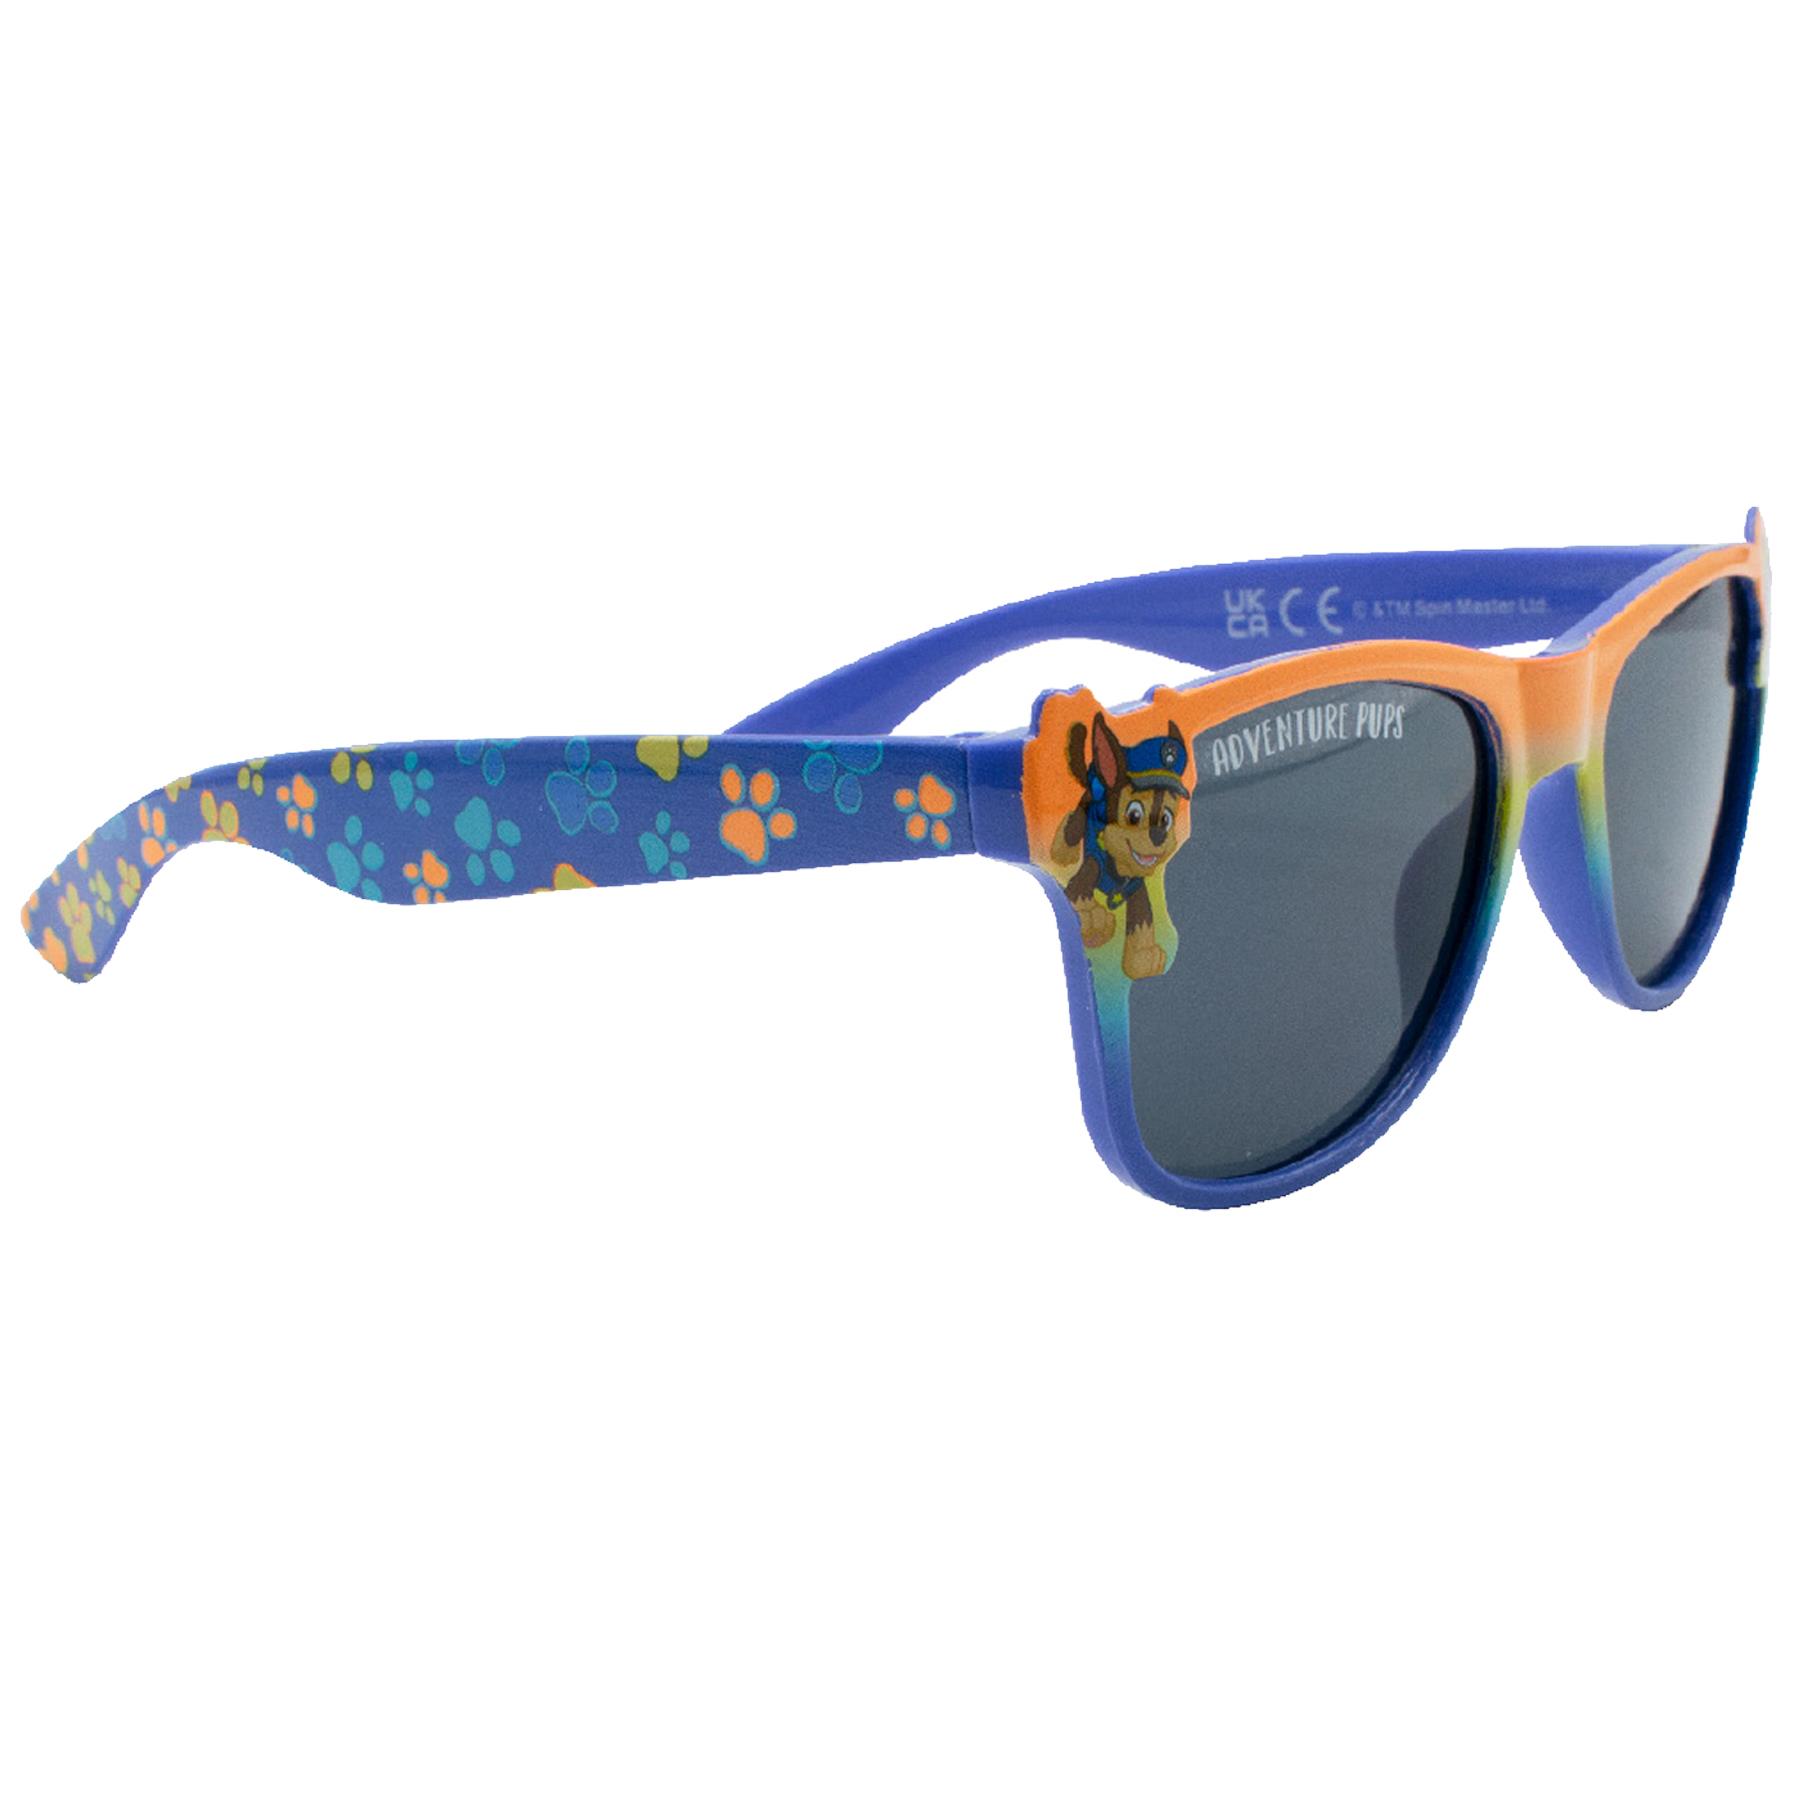 Paw Patrol Boys Children's Sunglasses UV protection for Holiday - PAW17